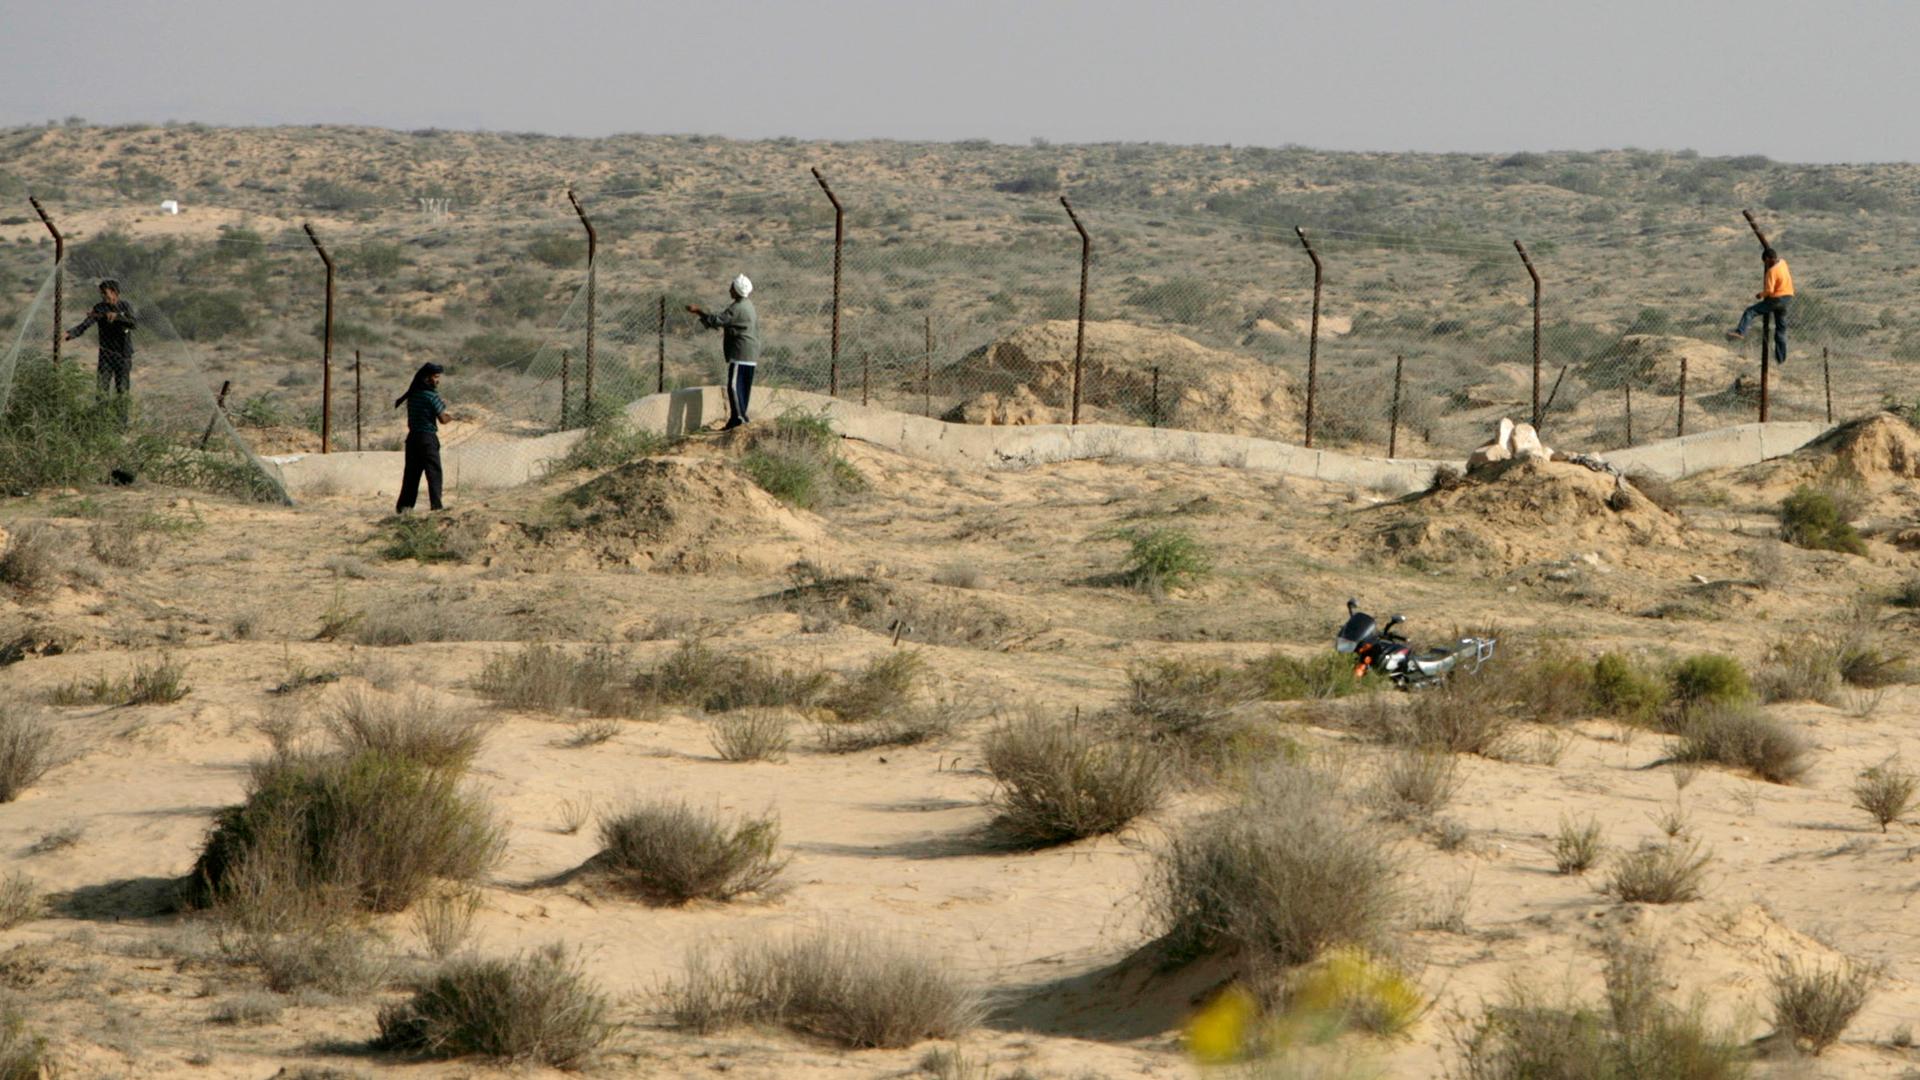 Bedouin loot barbed wire near a police checkpoint on the Egyptian border with Israel on the Sinai Peninsula.